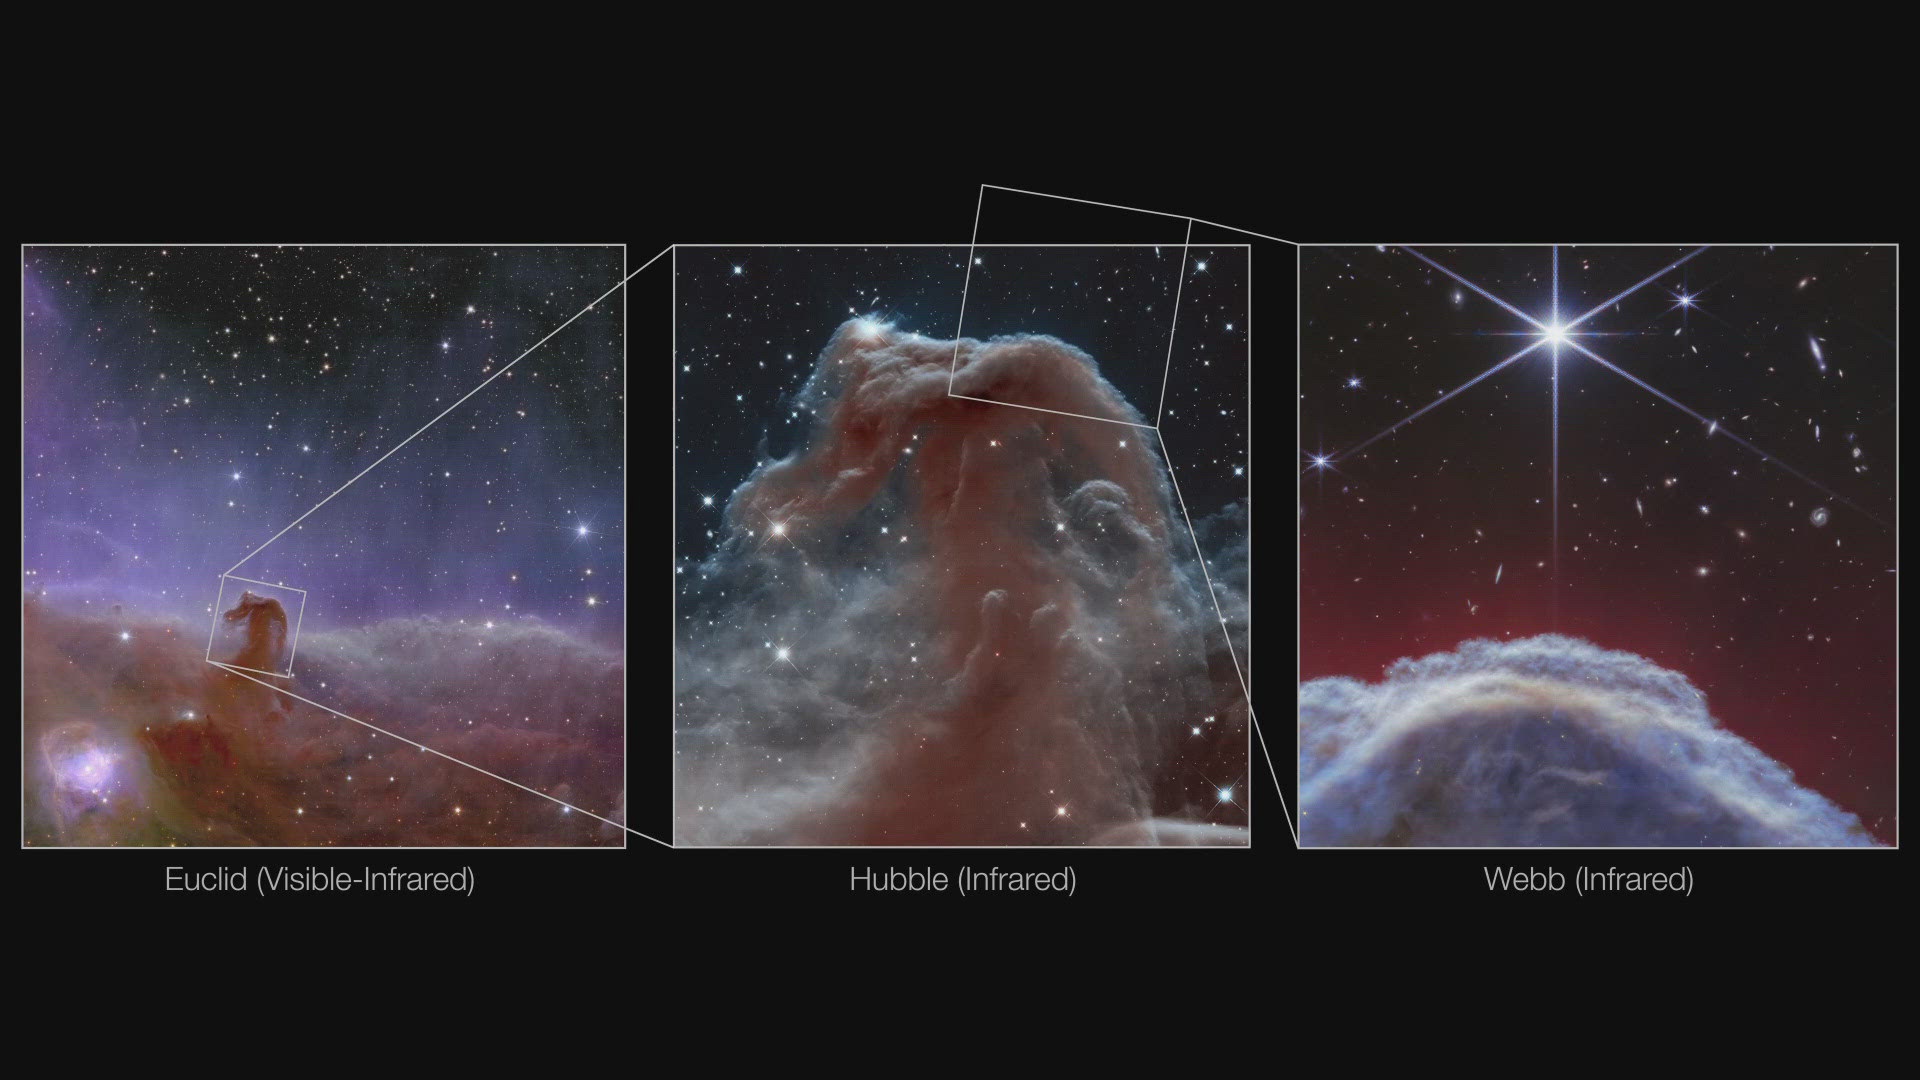 The powerful telescope is providing the most highly detailed pictures yet of a well-known feature in space.